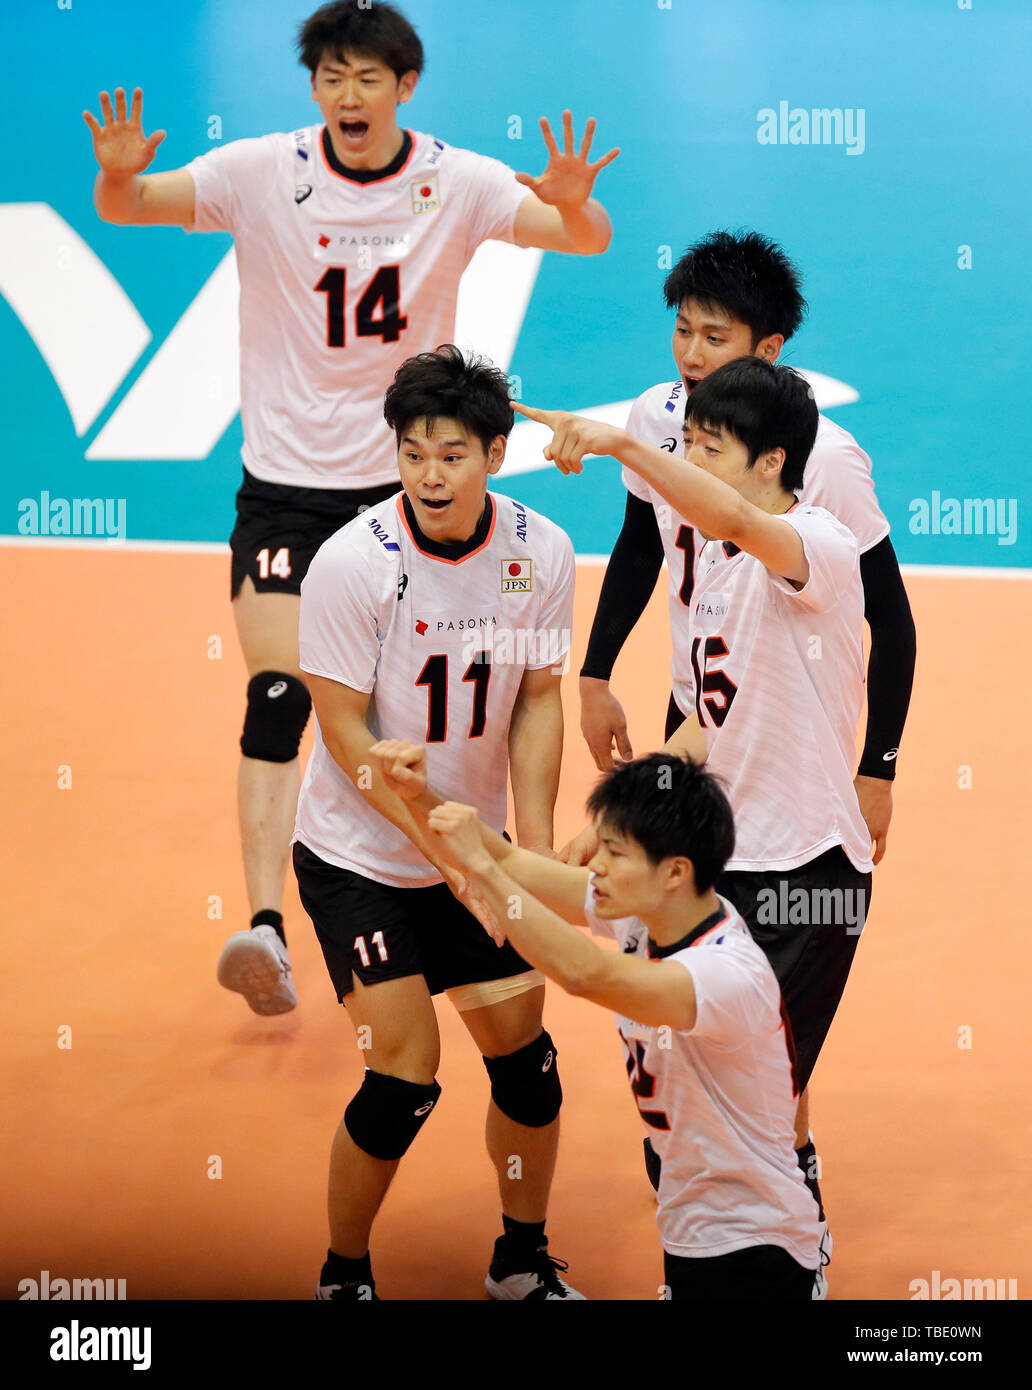 Novi Sad, Serbia. 31st May, 2019. Japan's players celebrate during the  Men's Volleyball Nations League match between Serbia and Japan in Novi Sad,  Serbia, on May 31, 2019. Japan won 3-1. Credit: